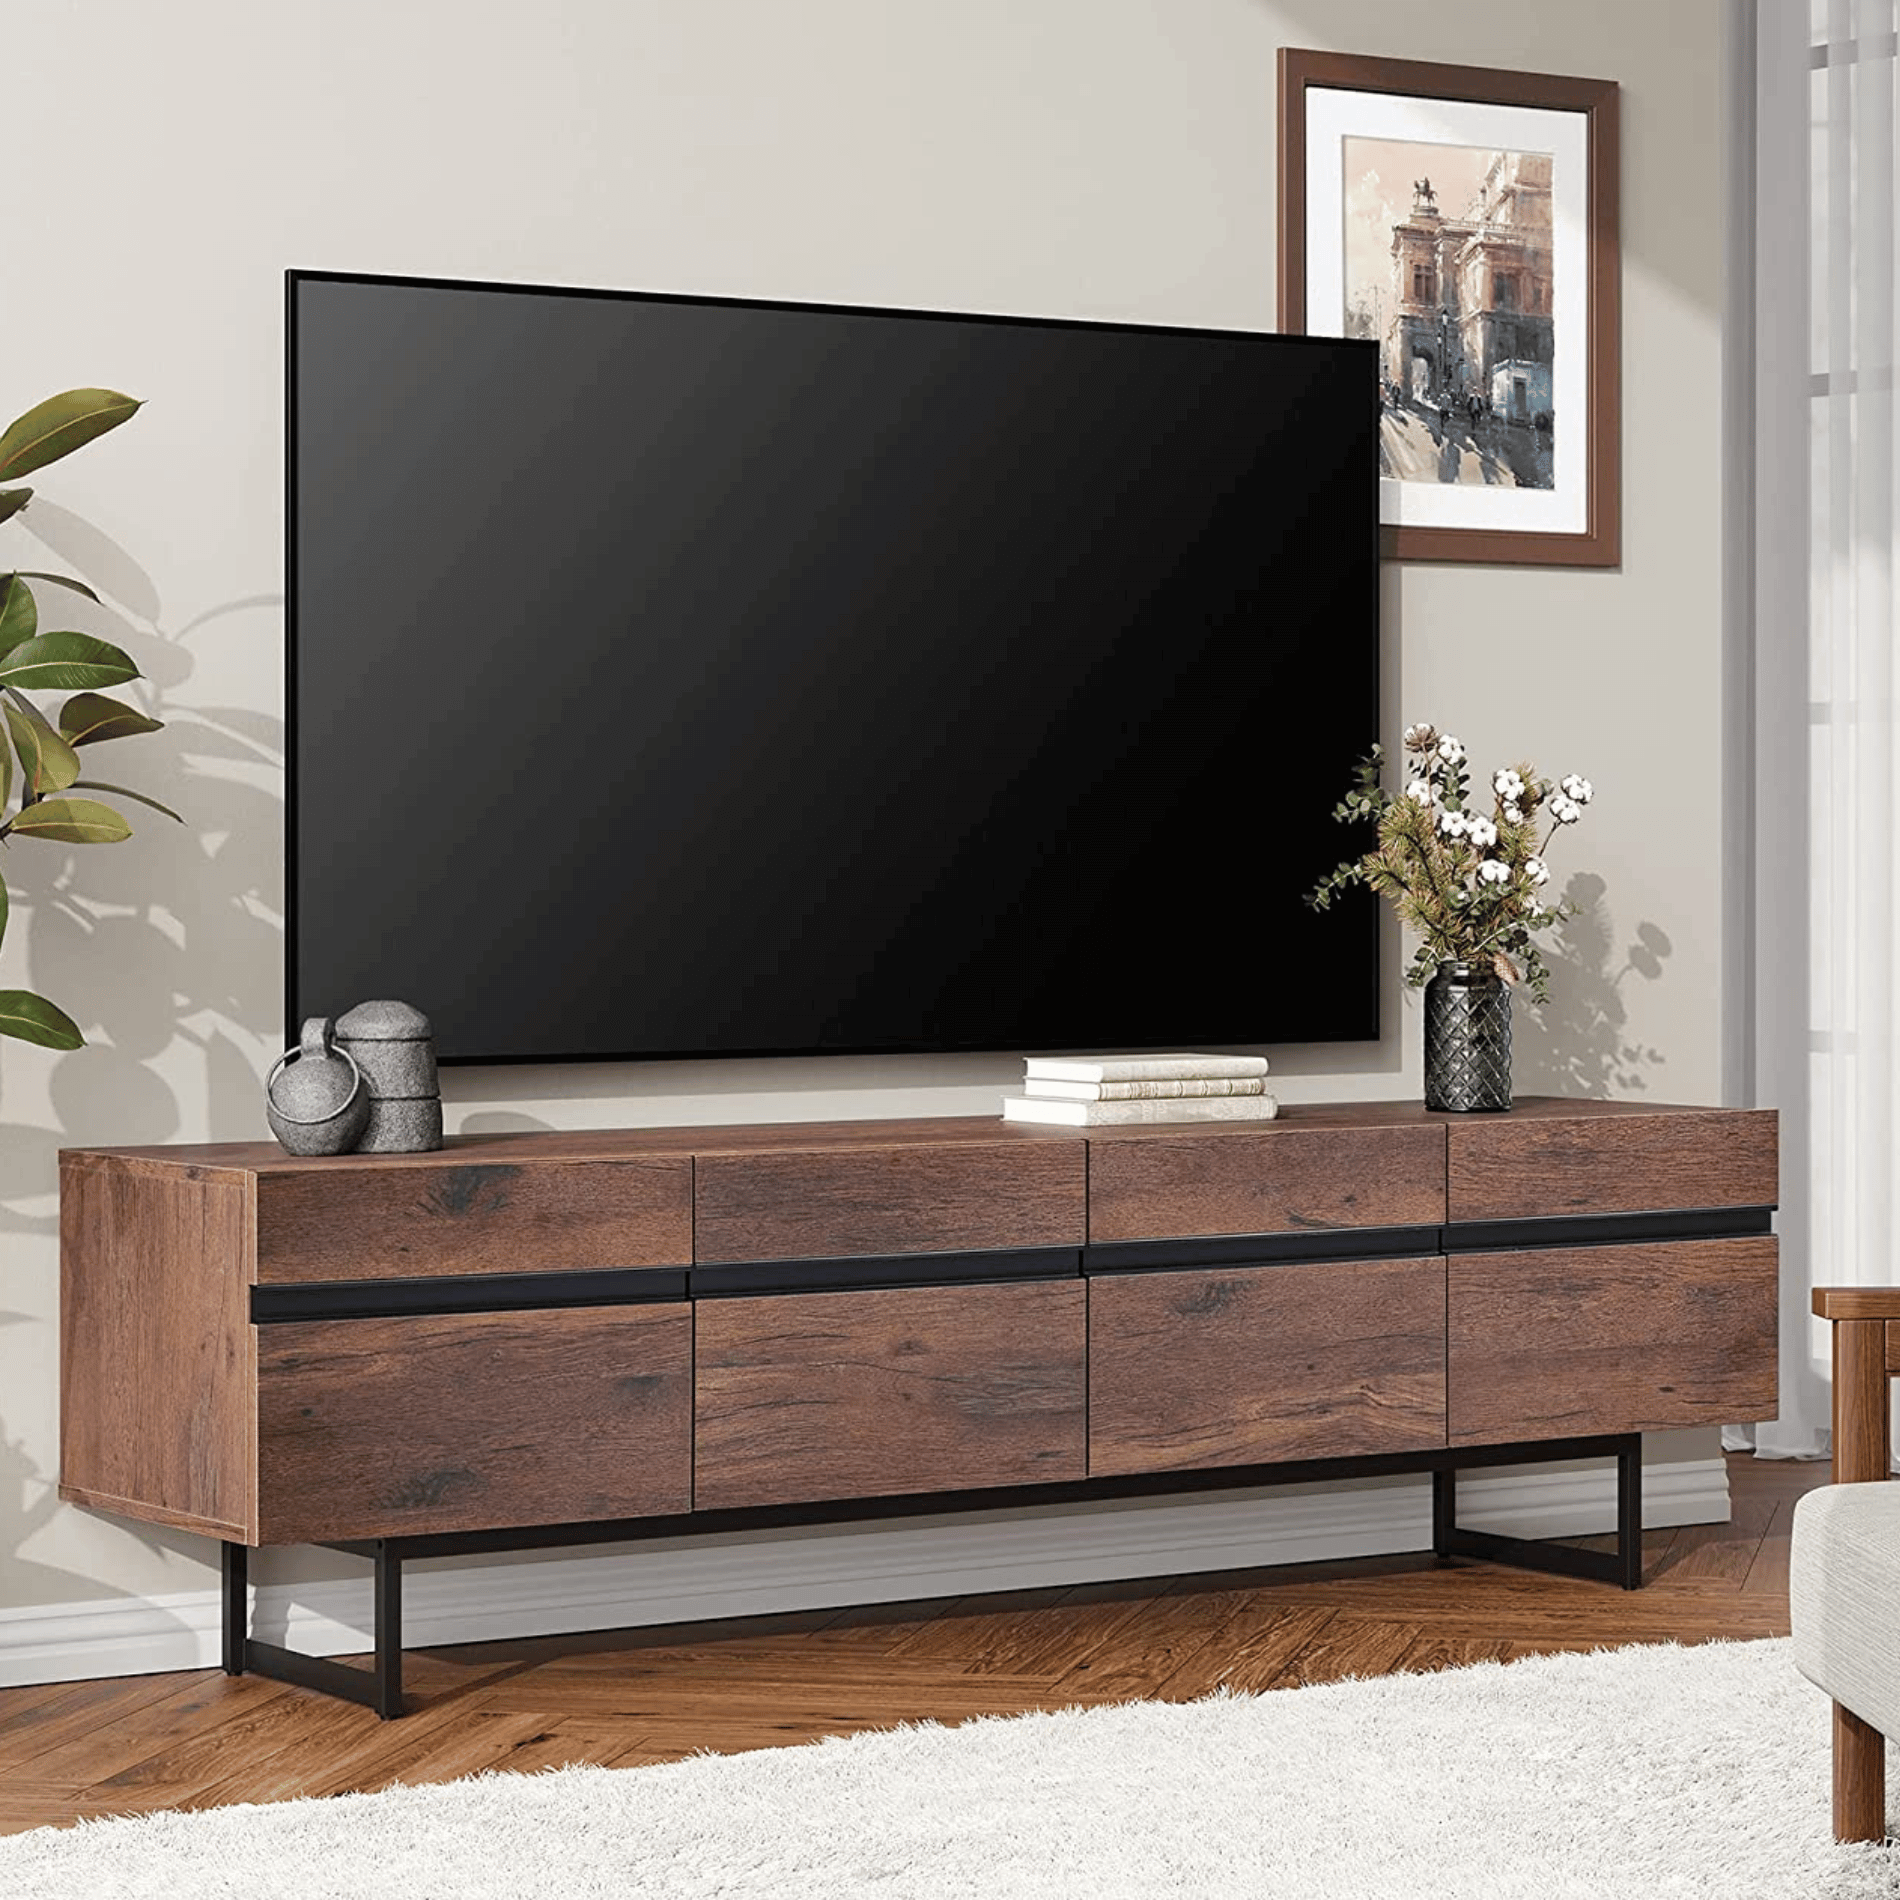 WAMPAT Modern TV Stand for up to 75 inch 2 in 1 Entertainment Center TV Console with Storage Cabinets Media Console for Living Room